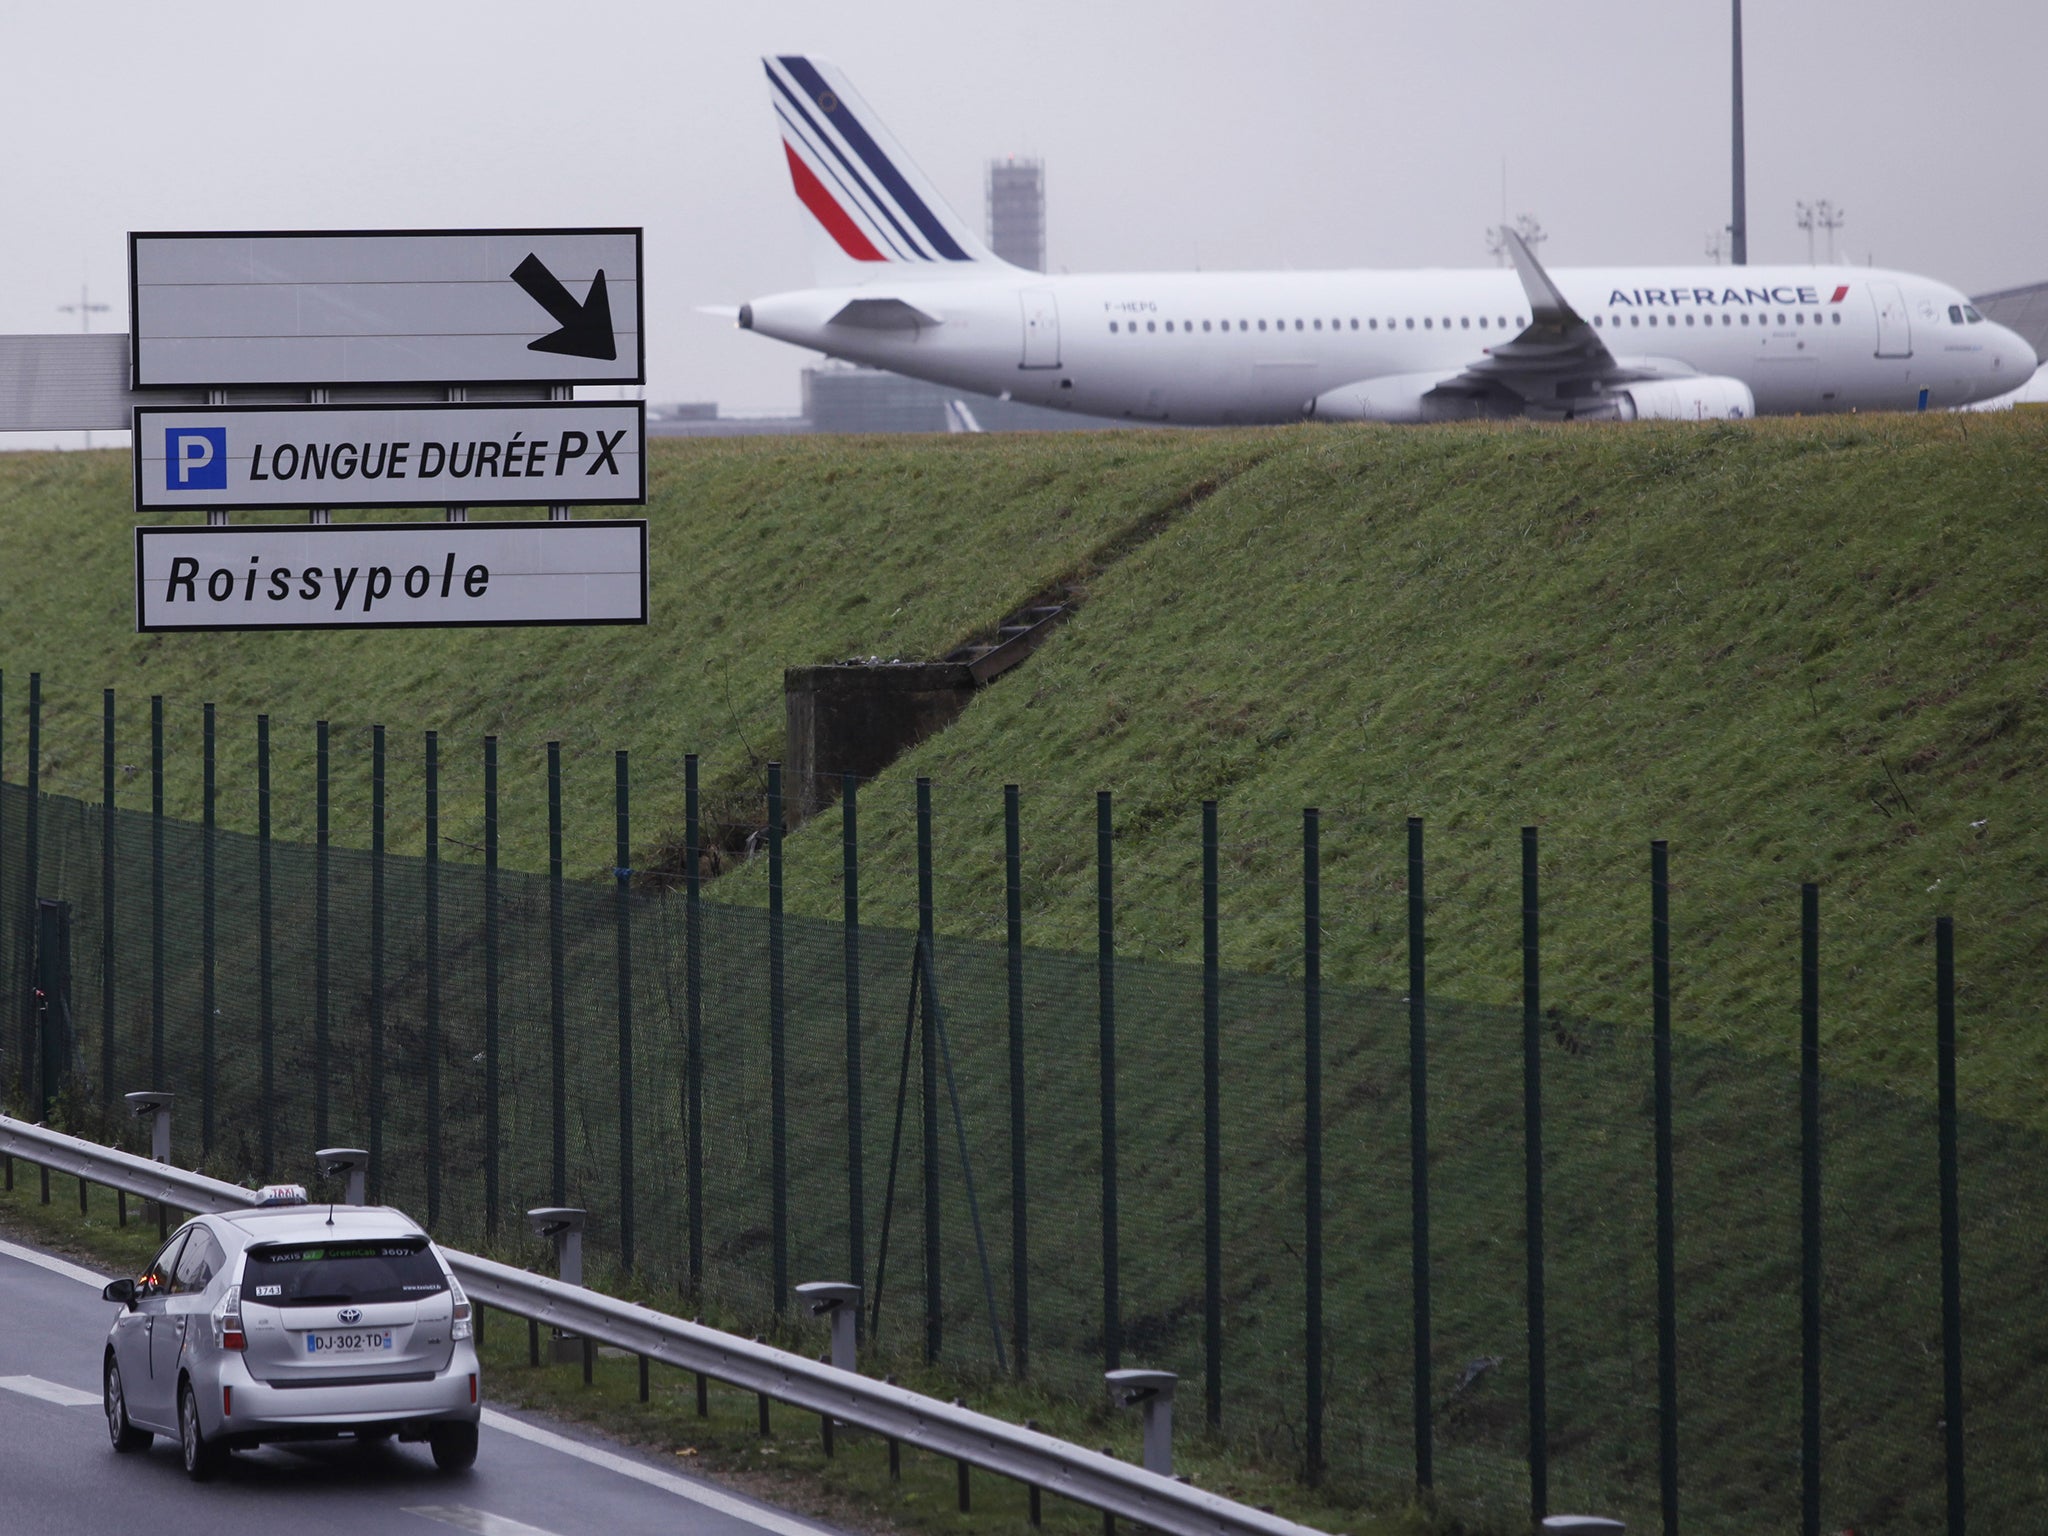 A plane on the tarmac at Charles de Gaulle airport, Paris. At least two Air France jets aborted their planned landings at the airport this morning